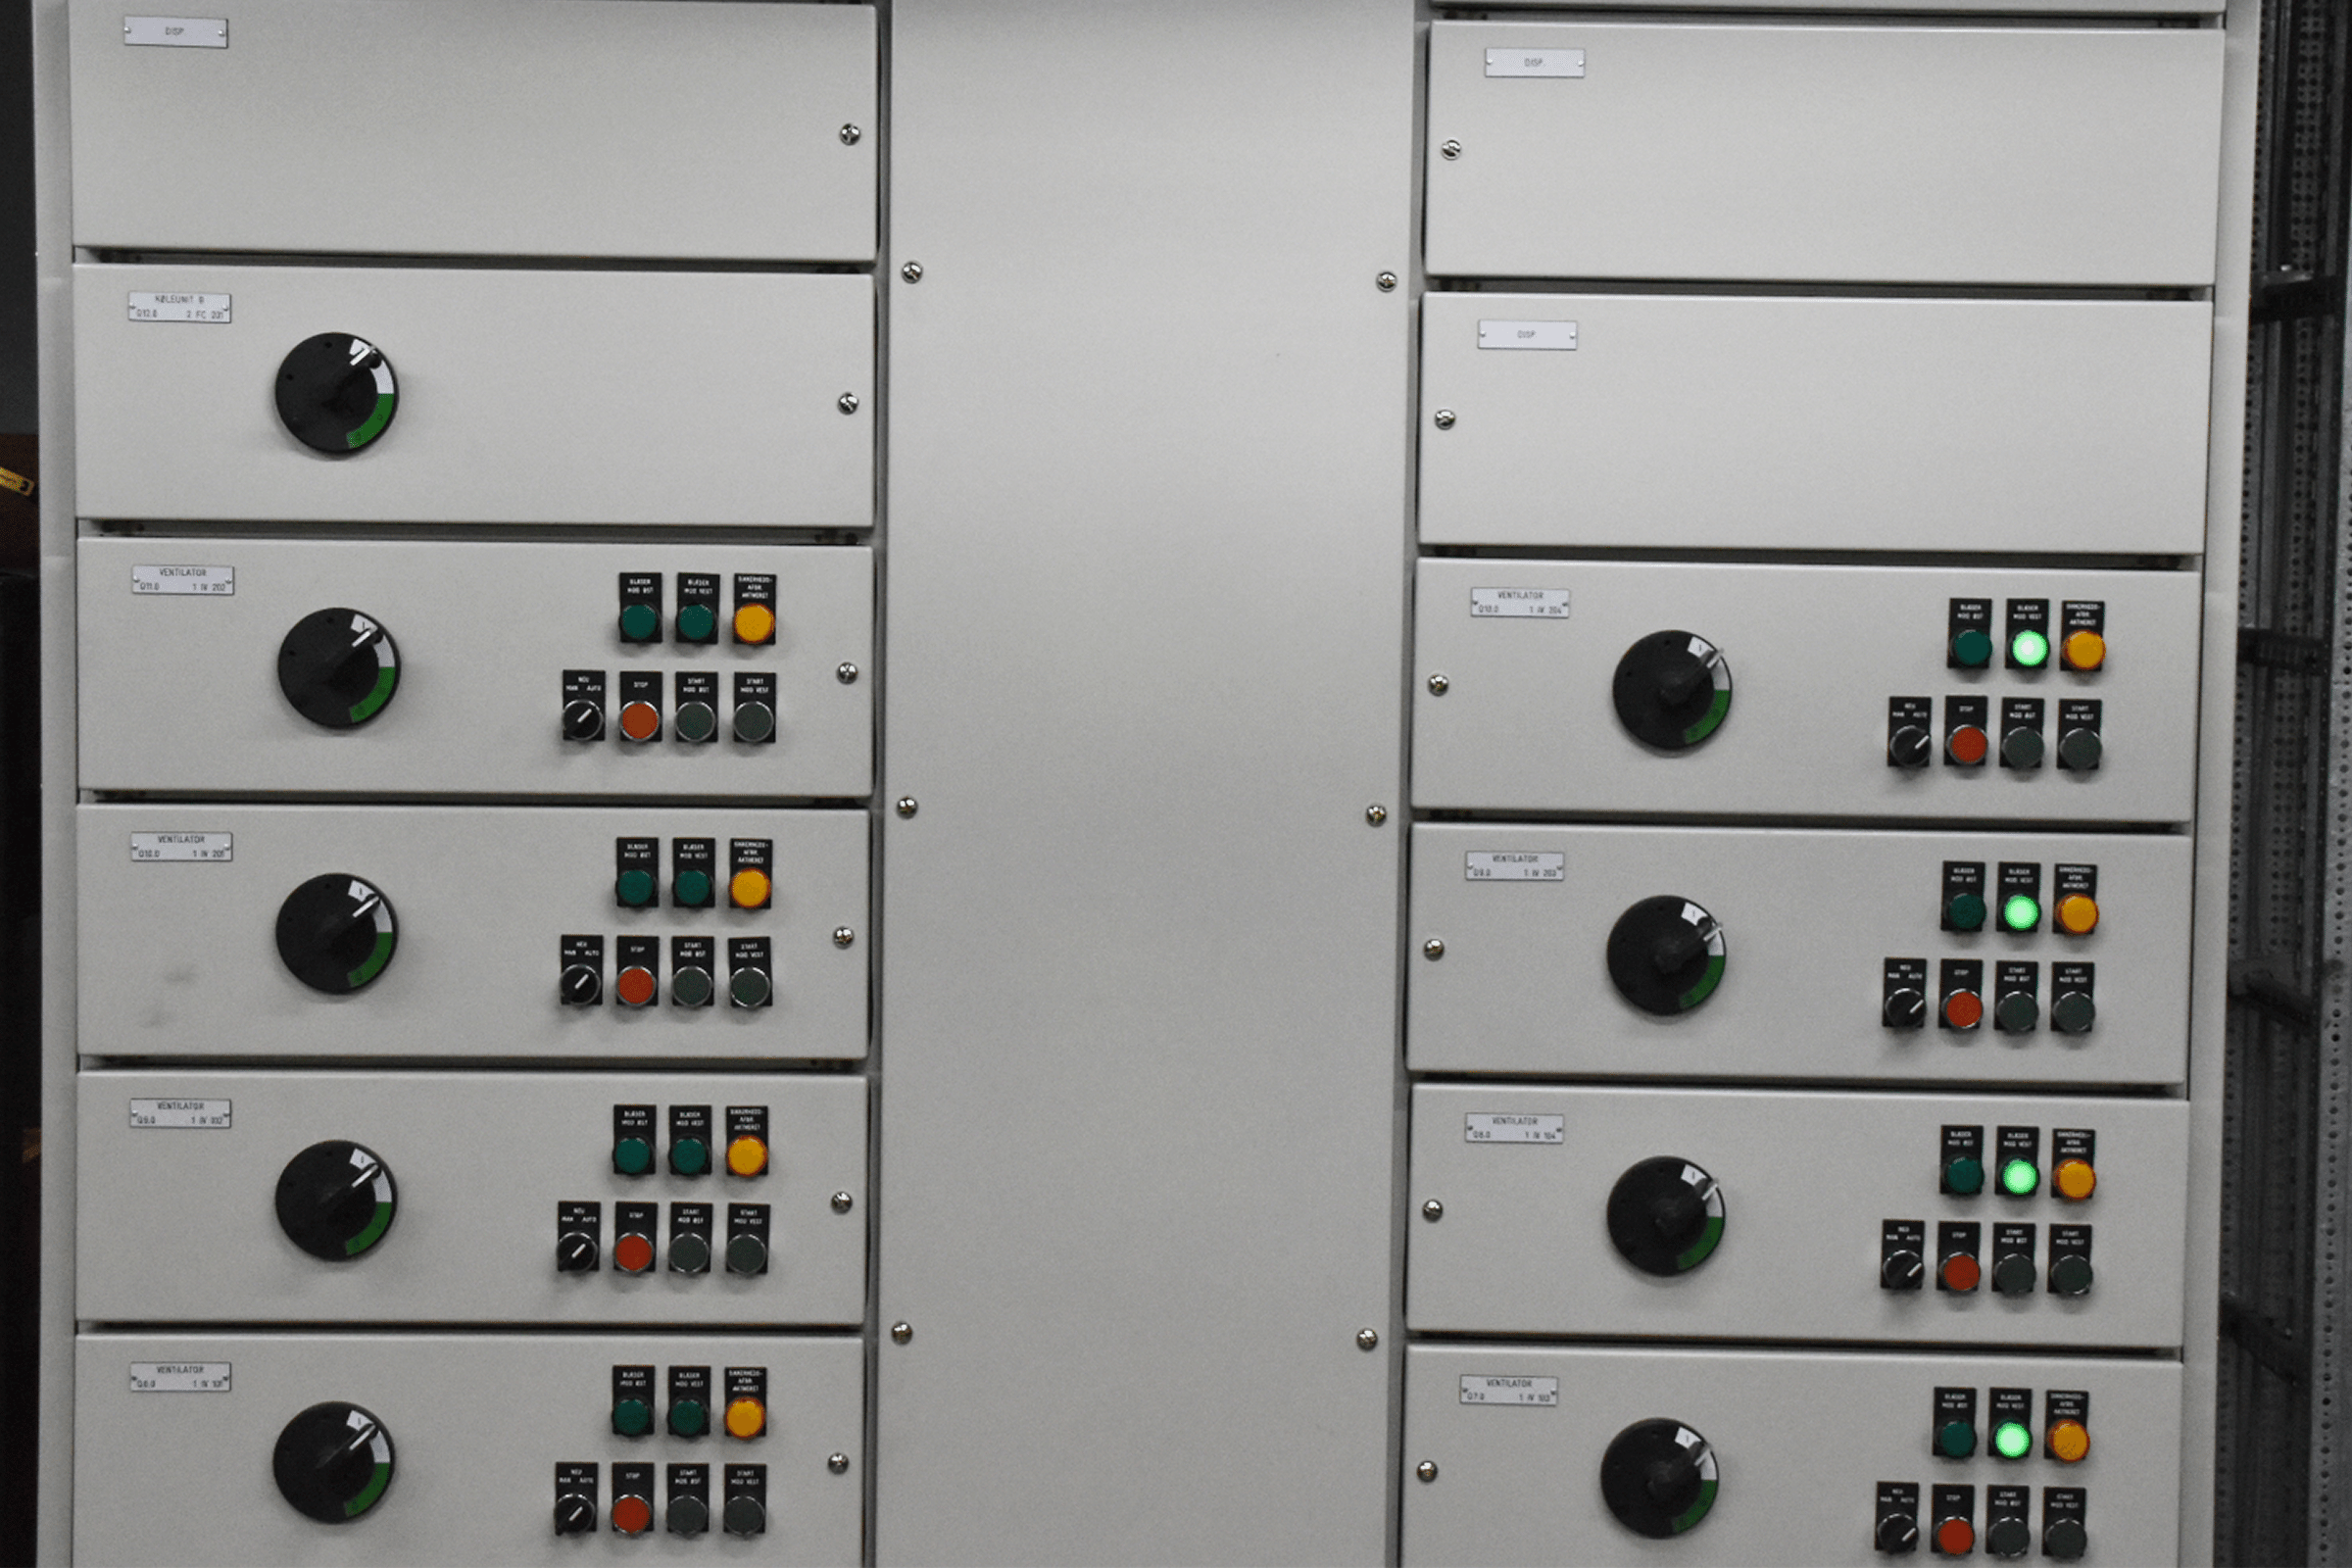 Fixed Functional Units in Logstrup's Low Voltage Switchbord